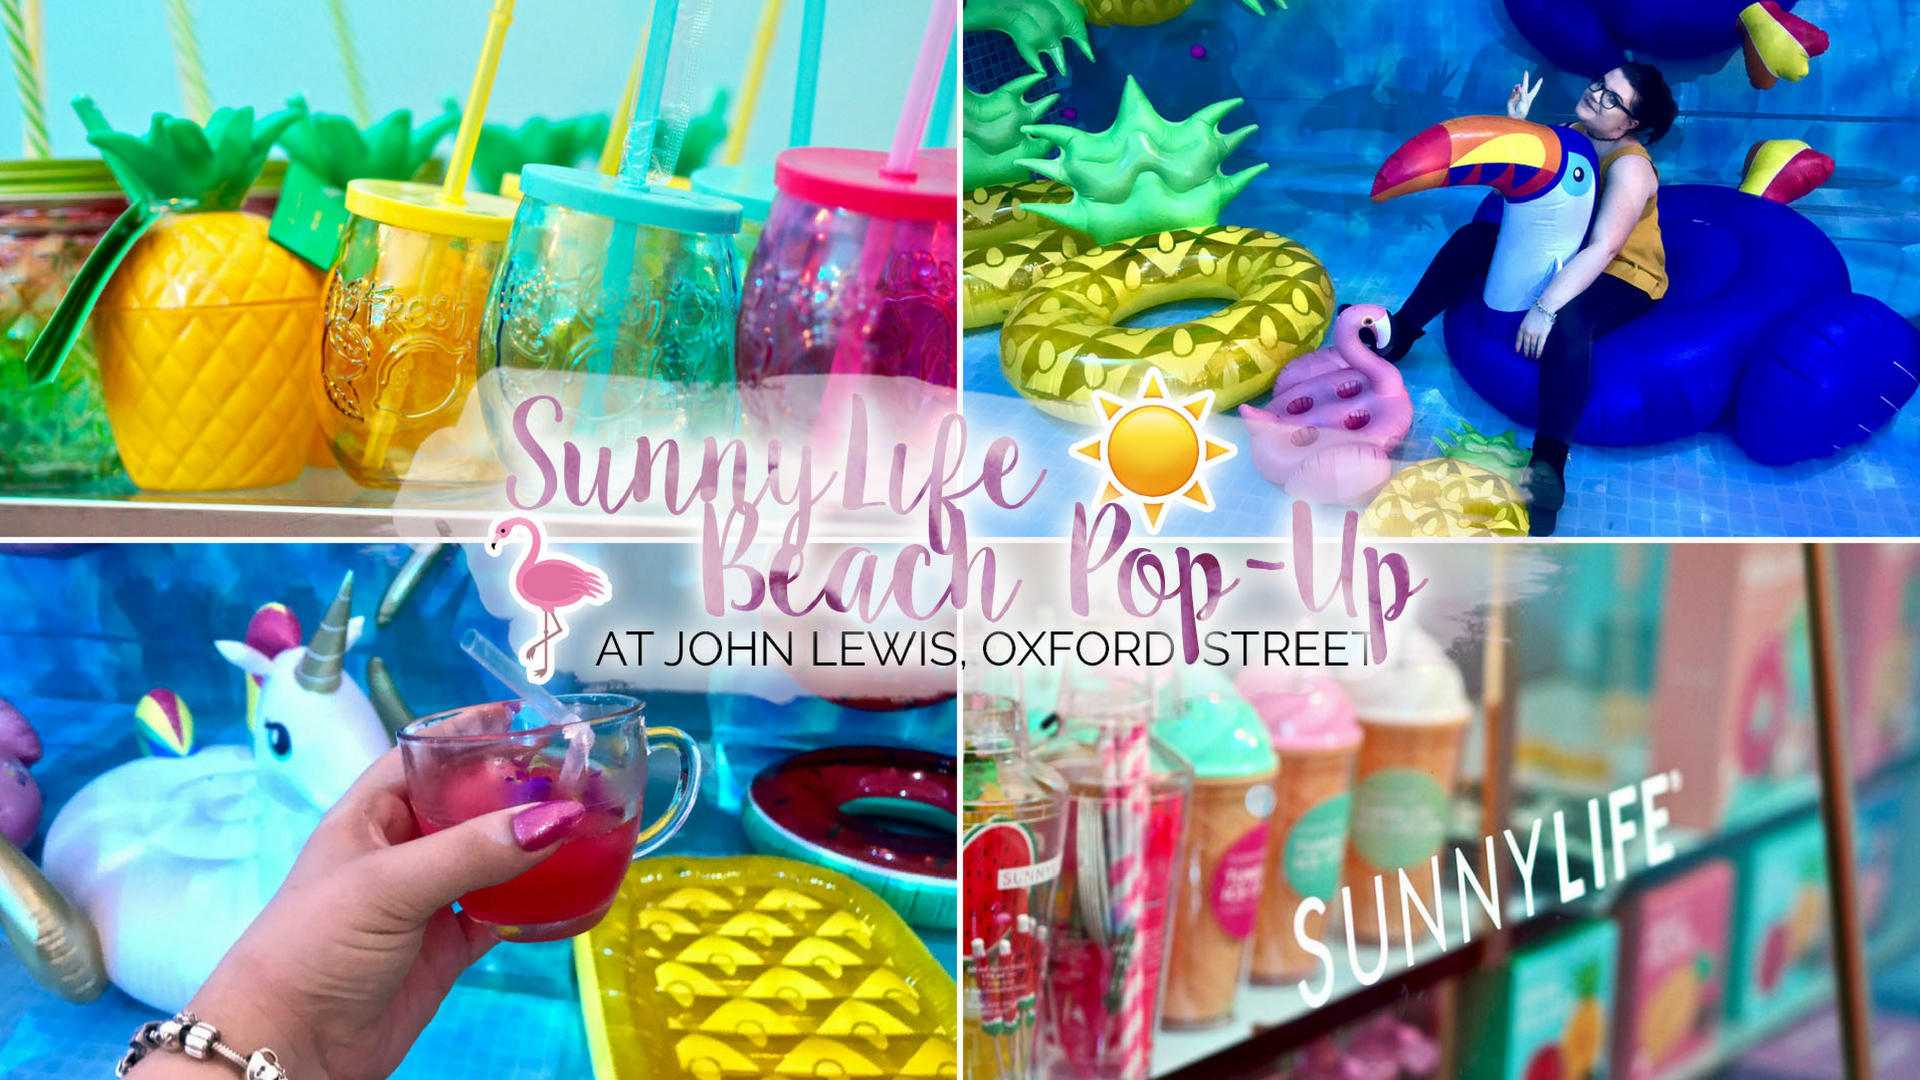 Sunnylife Poolside Pop-up At John Lewis, Oxford Street - Fictional Character , HD Wallpaper & Backgrounds